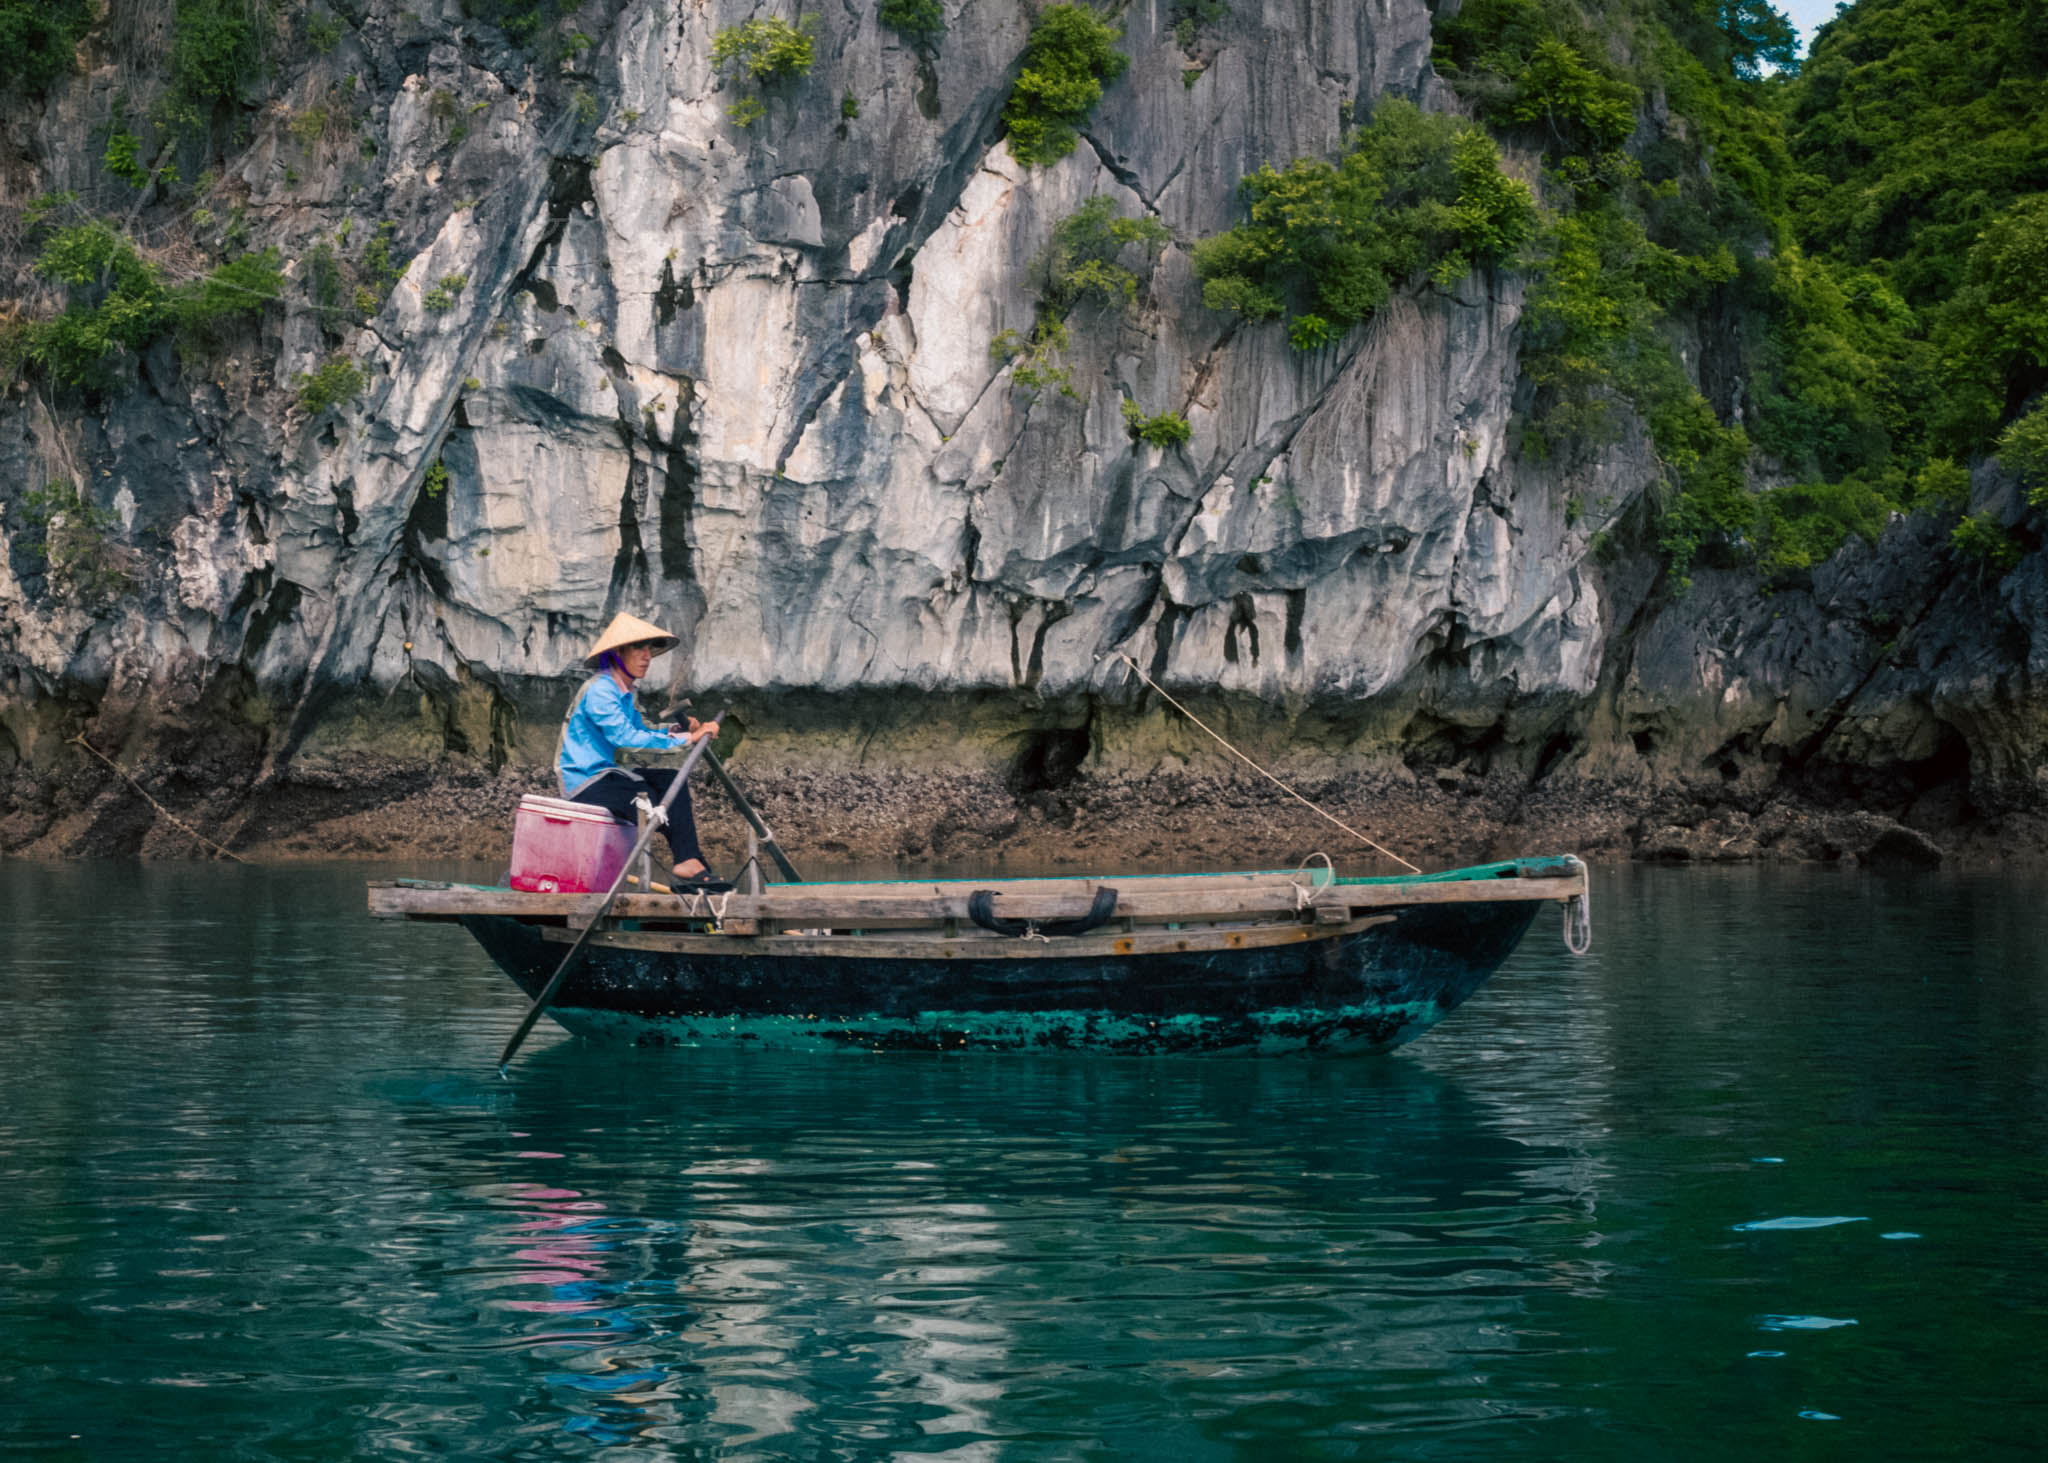 Solitary woman rowing a rustic boat in serene Ha Long Bay emerald waters against a limestone cliff backdrop.